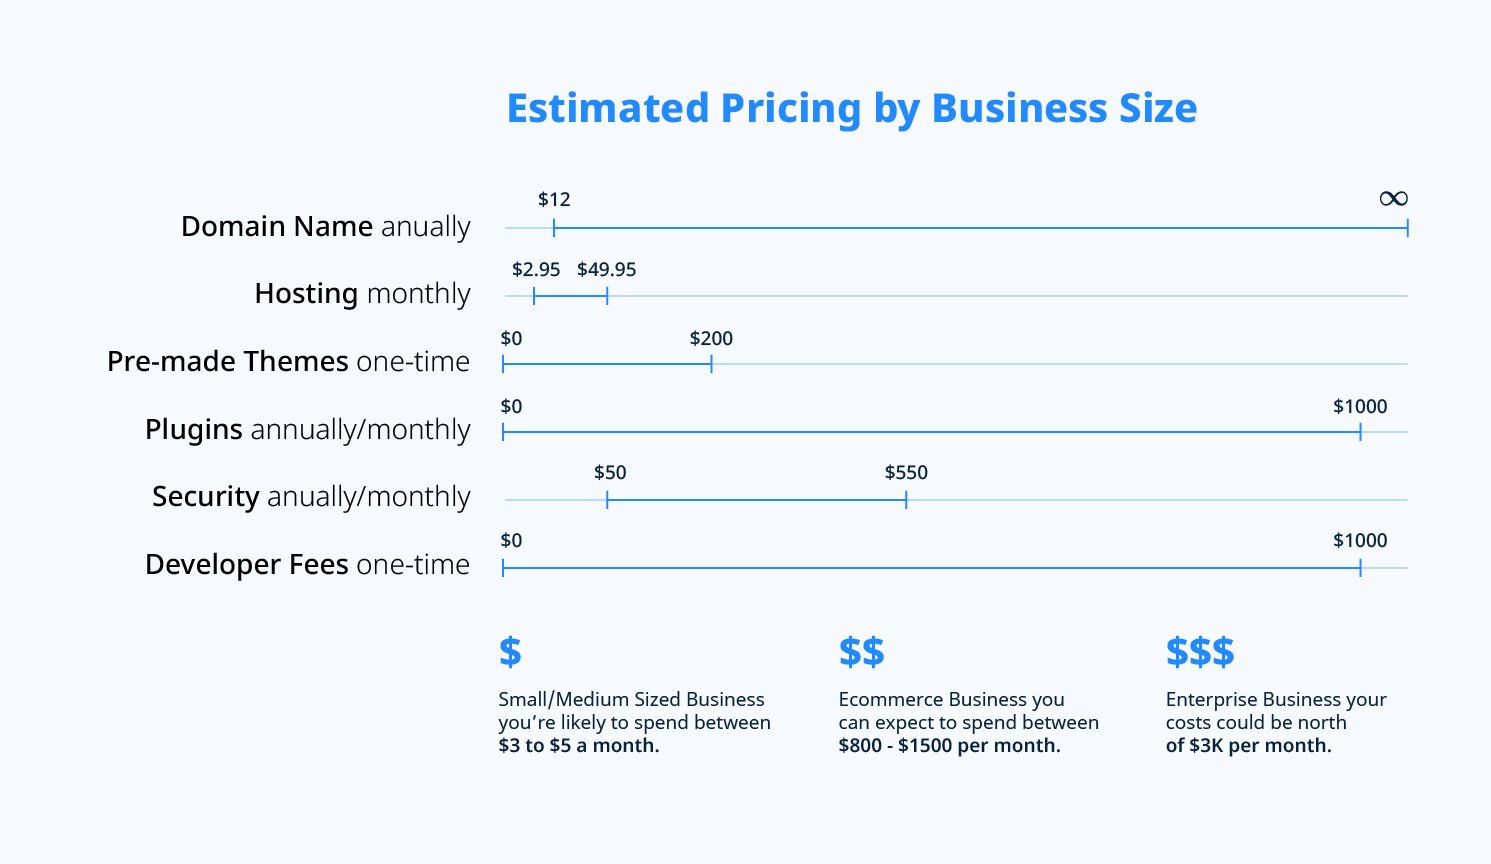 Estimated Pricing by Business Size